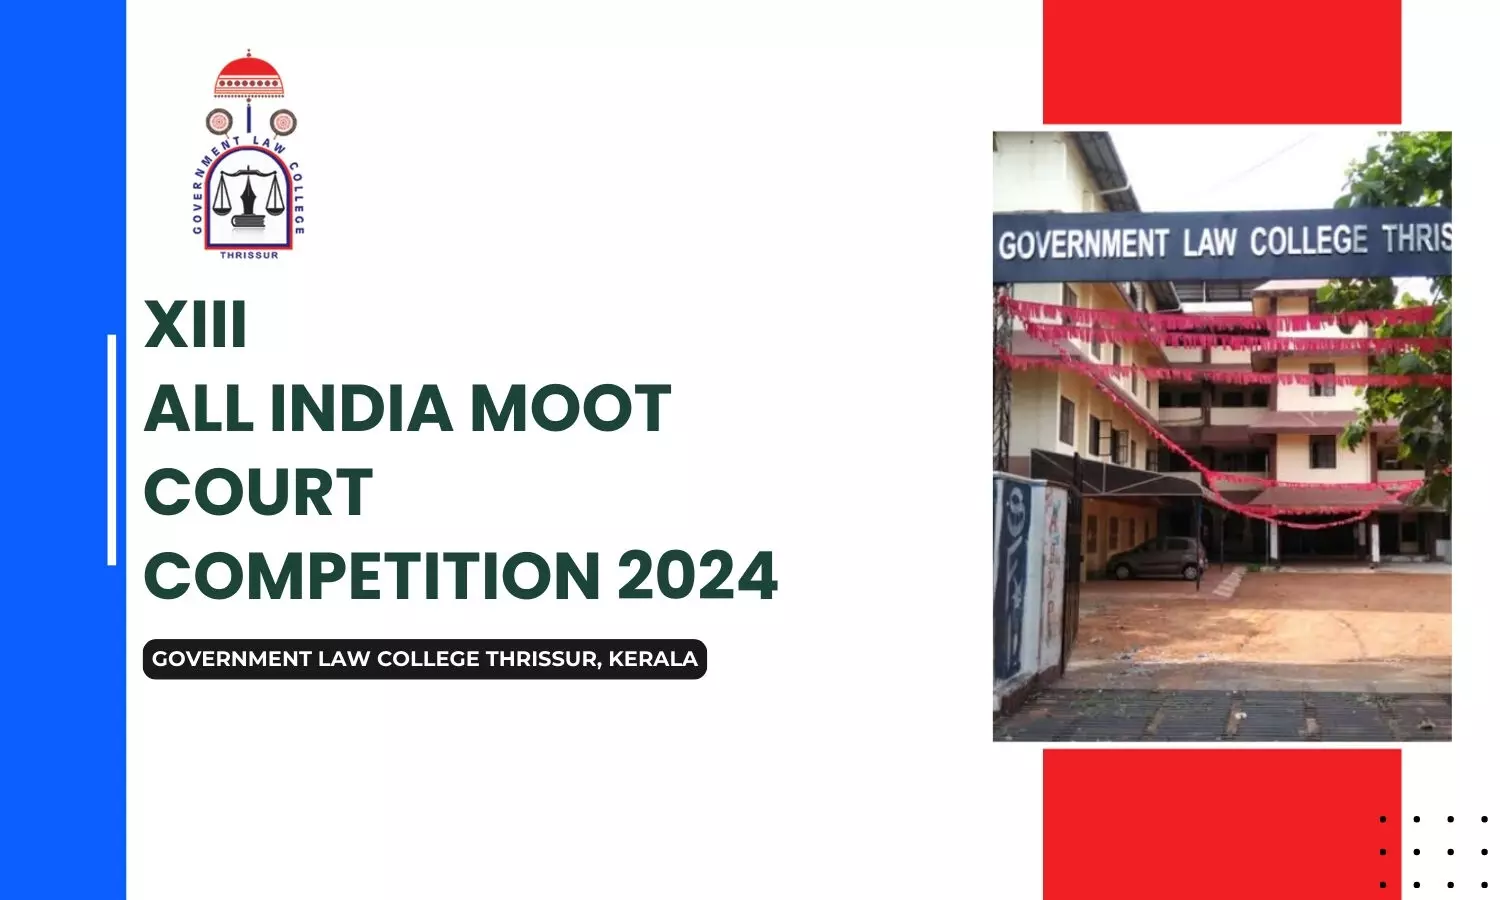 XIII All India Moot Court Competition 2024  Government Law College Thrissur, Kerala